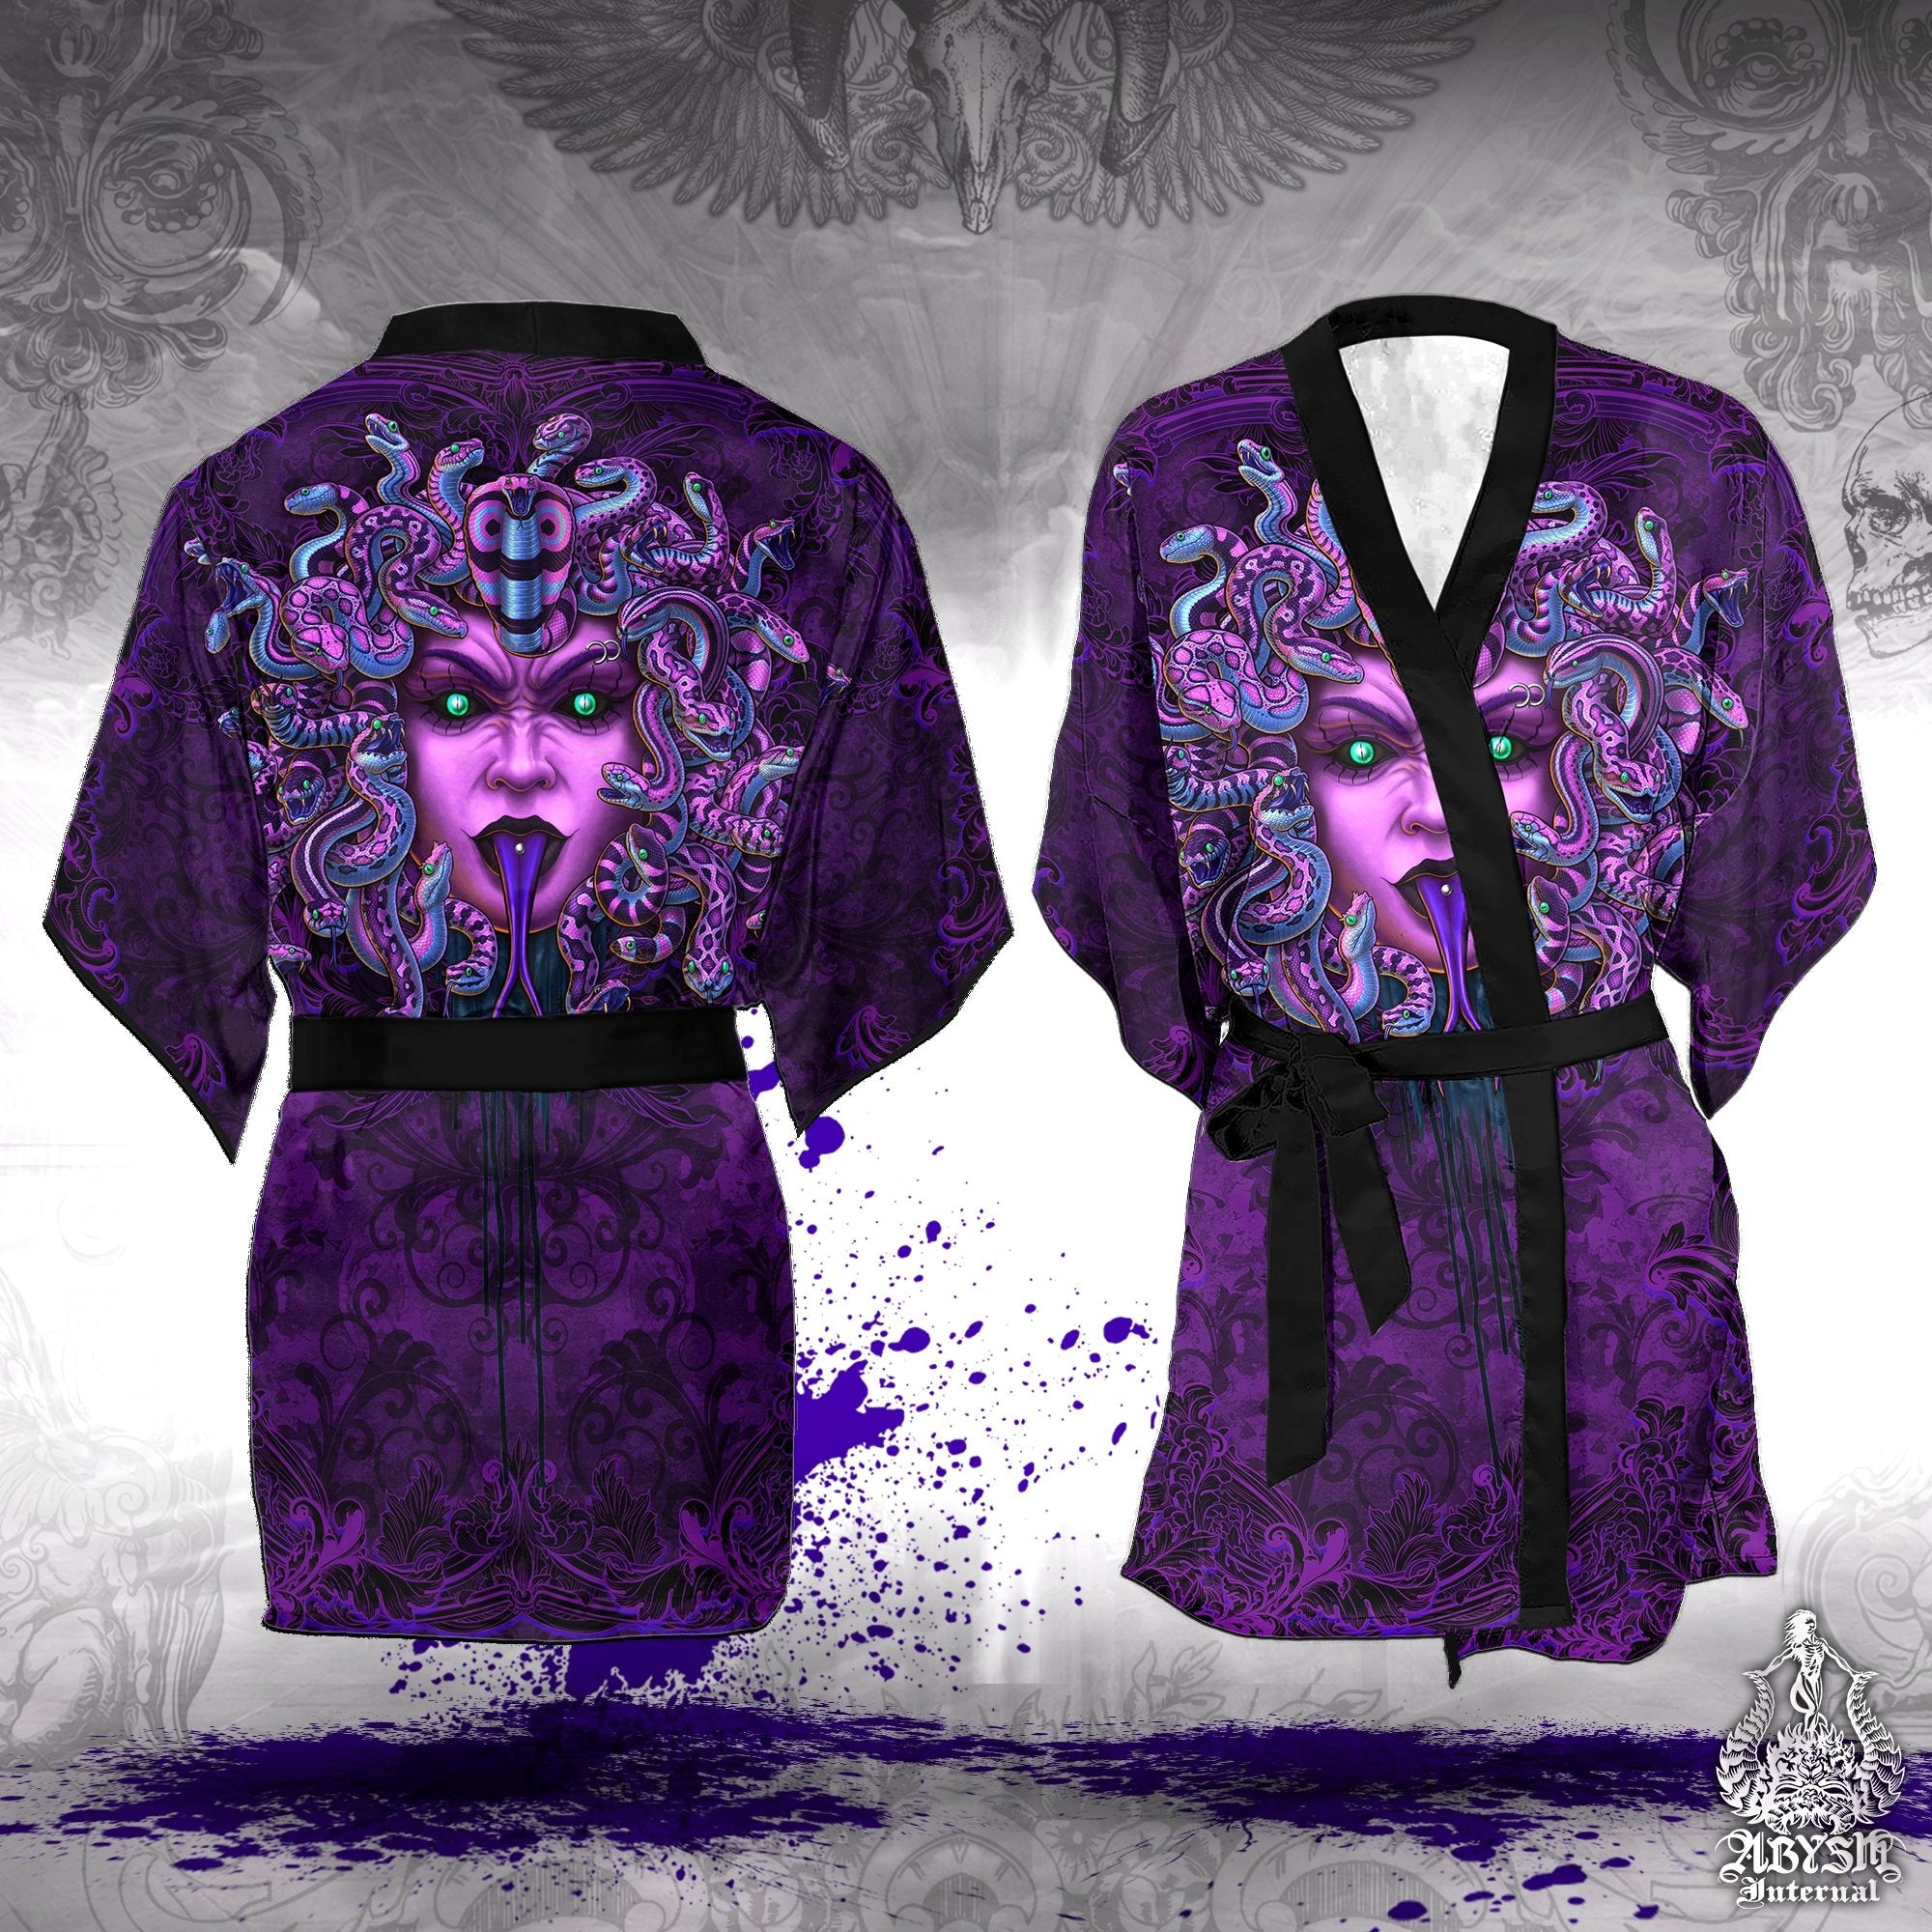 Medusa Cover Up, Beach Outfit, Party Kimono, Summer Festival Robe, Gothic Indie and Alternative Clothing, Unisex - Pastel Goth - Abysm Internal